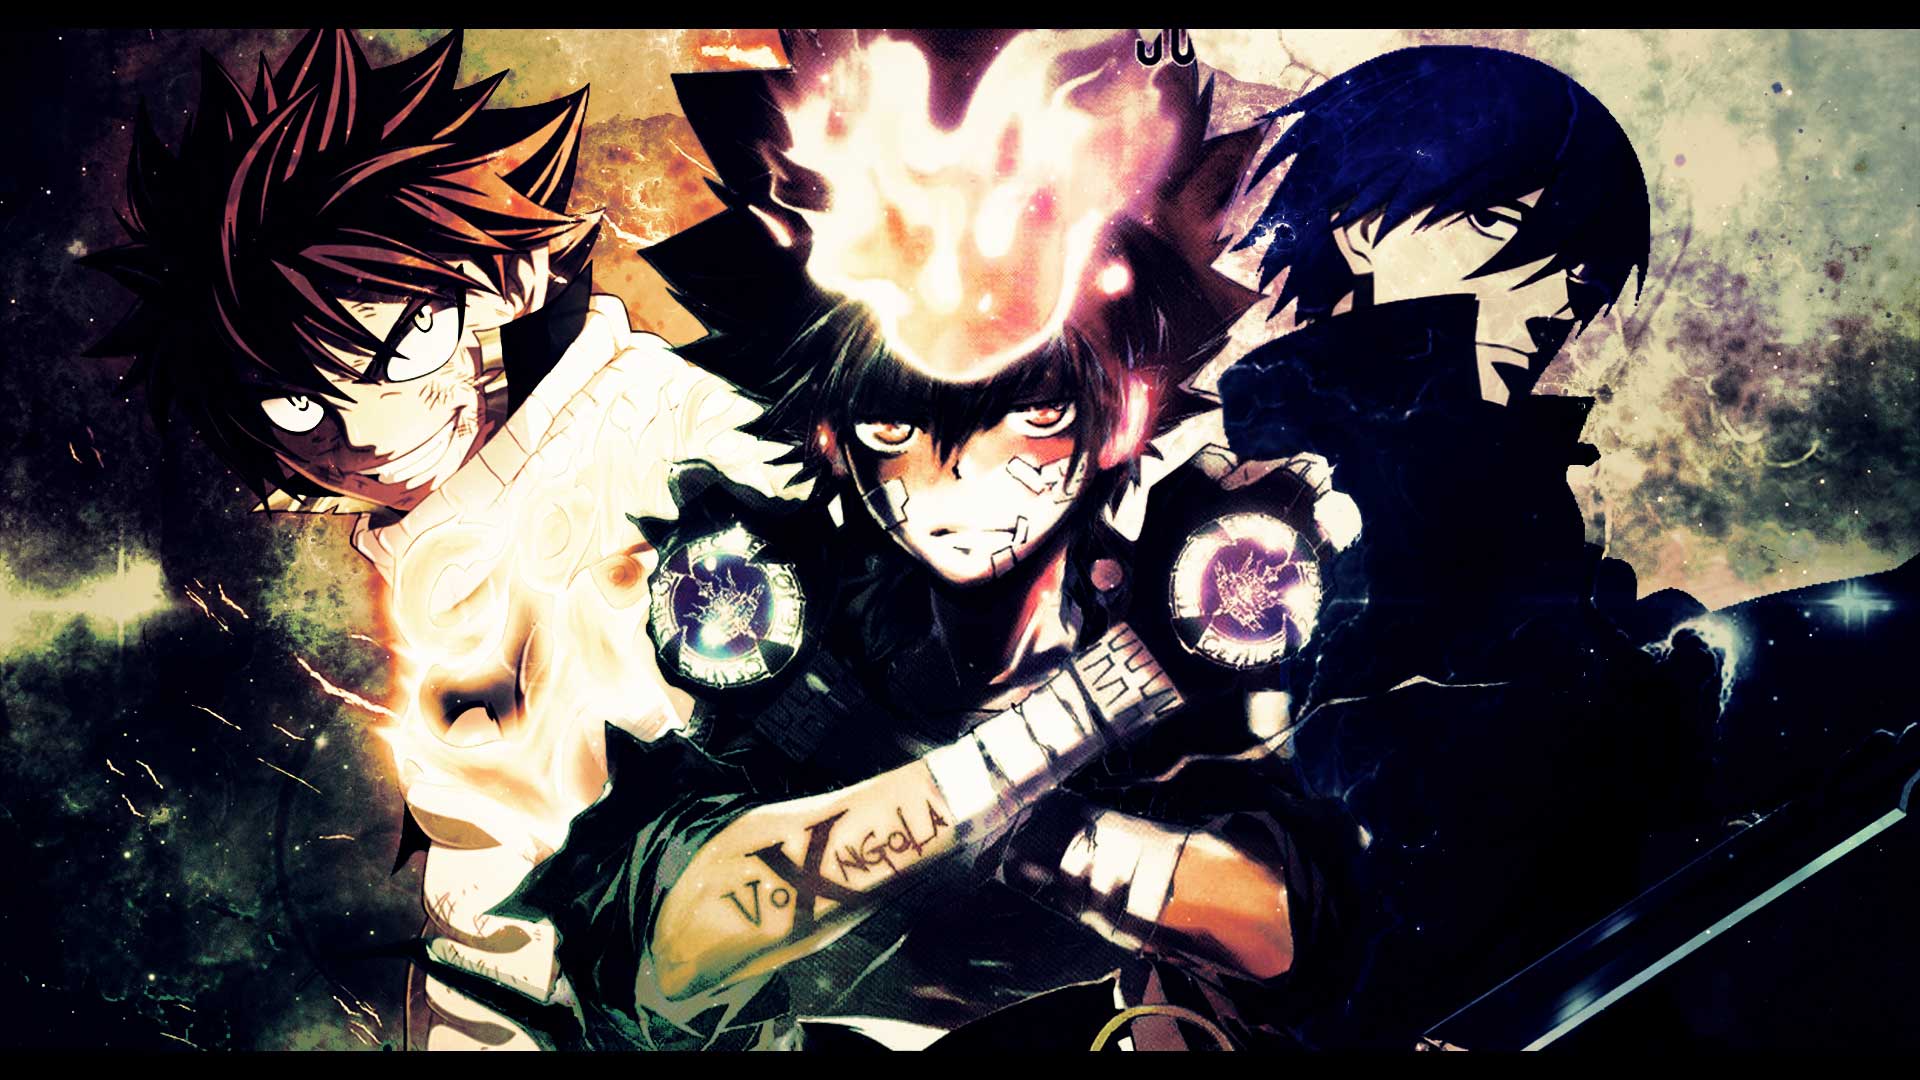 Fairy Tail Anime Desktop Wallpapers HD – Anime Wallpapers